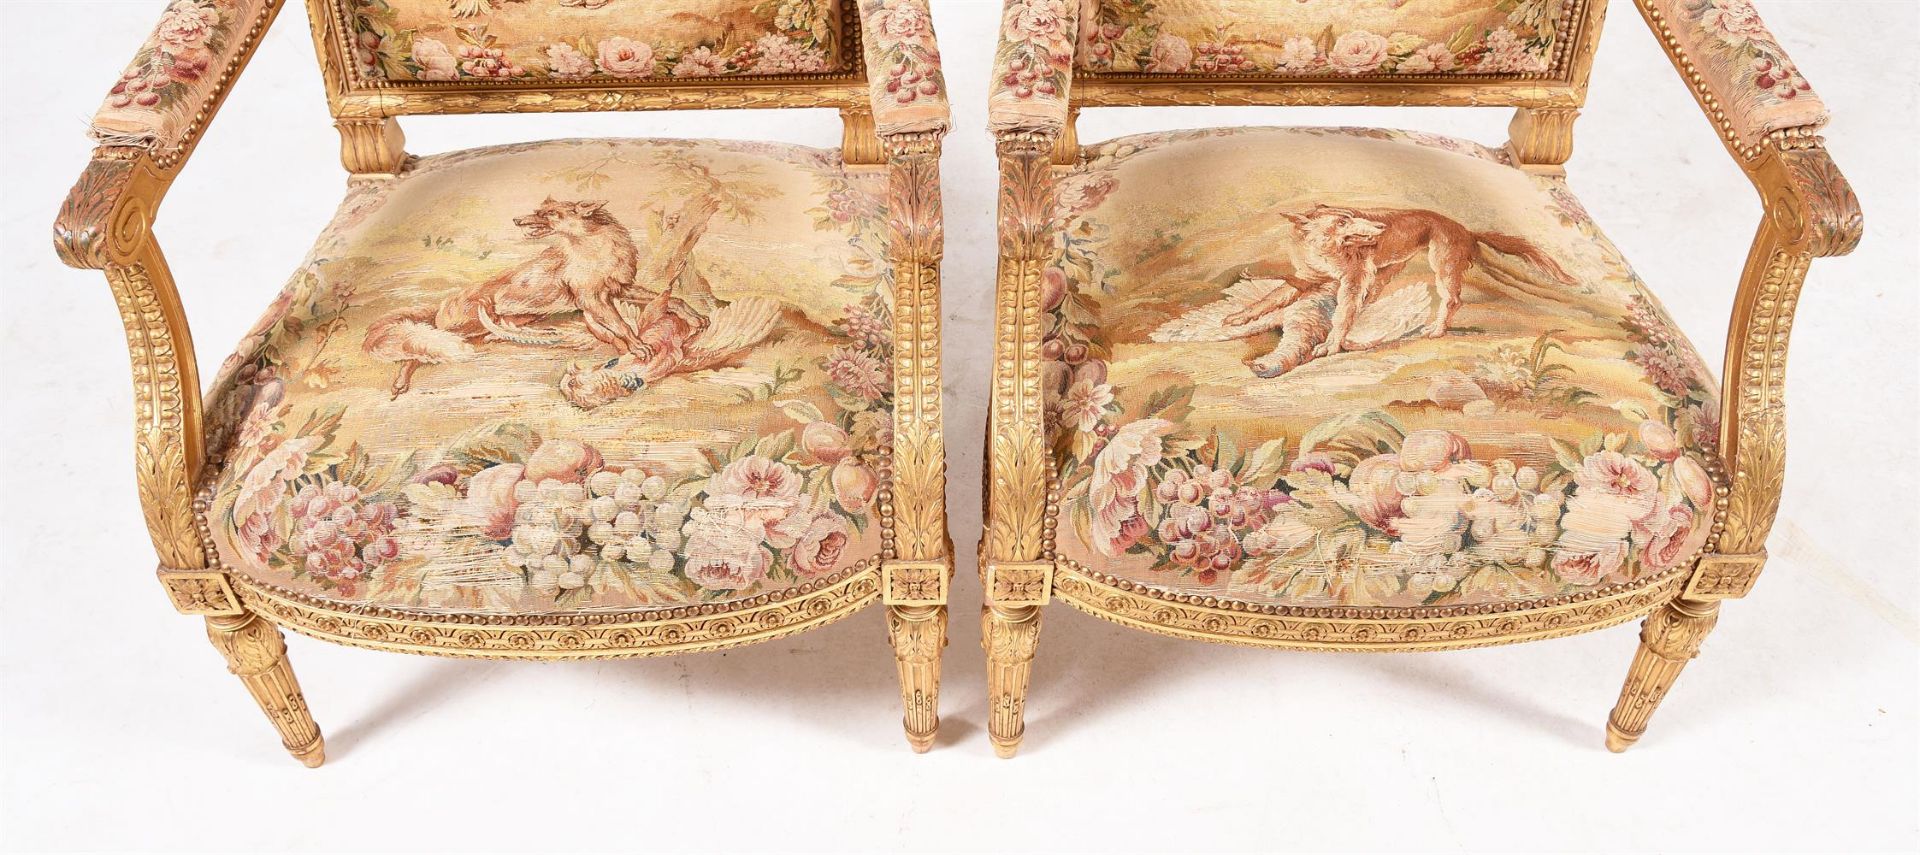 A FRENCH TRANSITIONAL AUBUSSON UPHOLSTERED GILTWOOD SALON SUITE, IN LOUIS XVI STYLE - Image 5 of 10